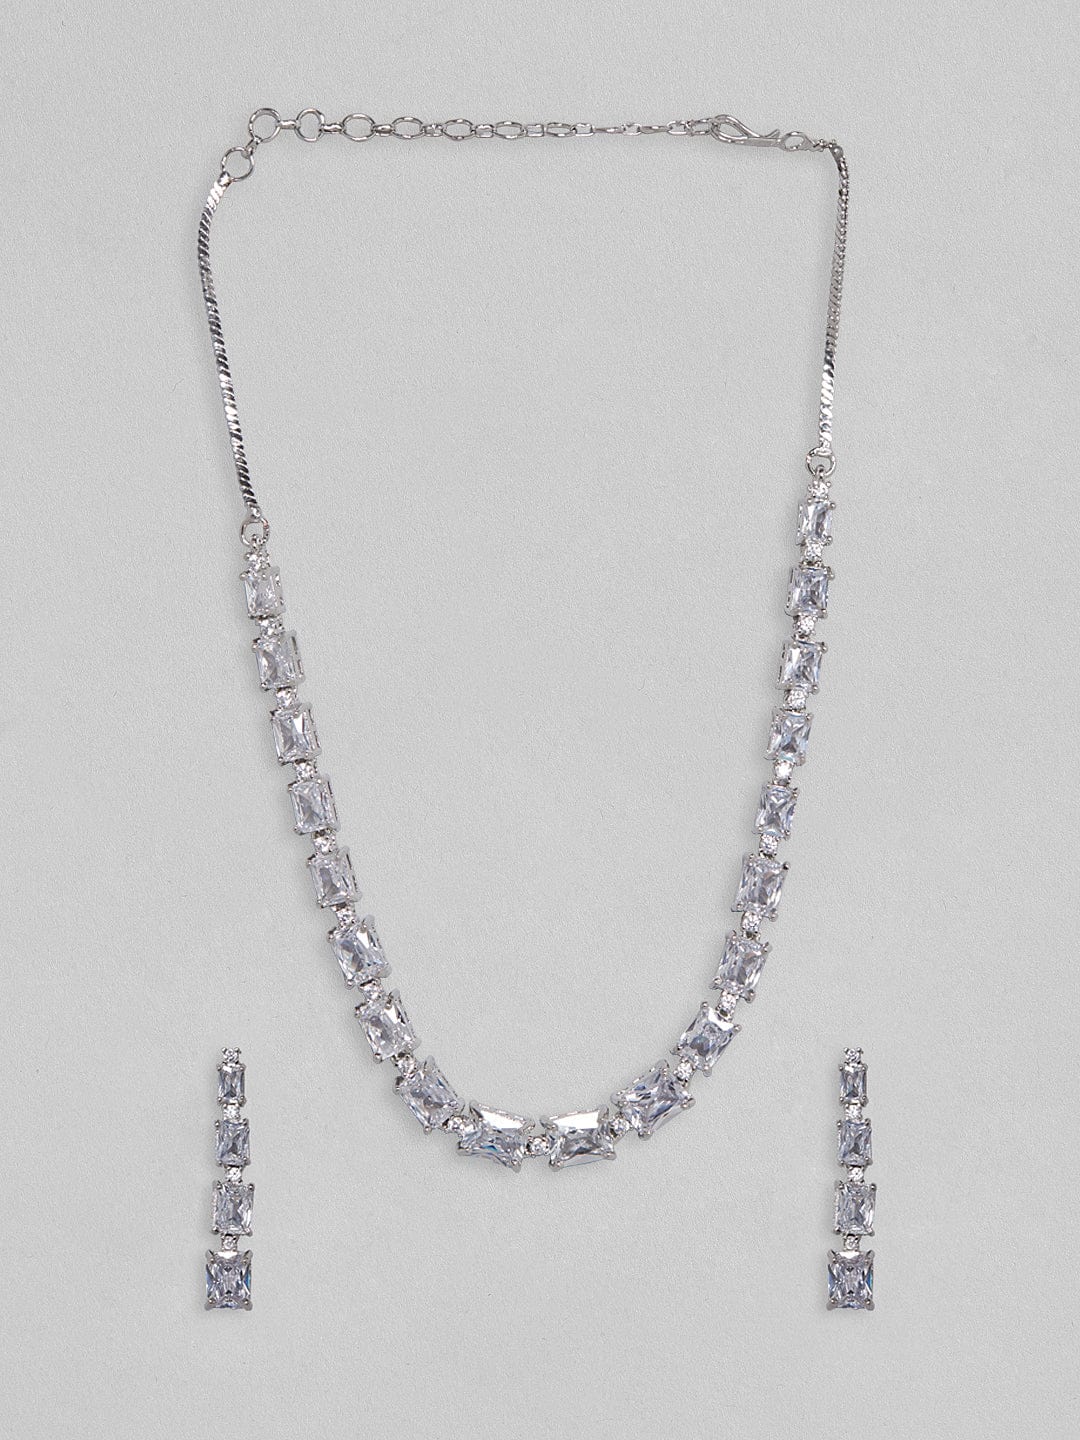 Rubans Silver Plated Necklace Set With White Stones. Necklace Set